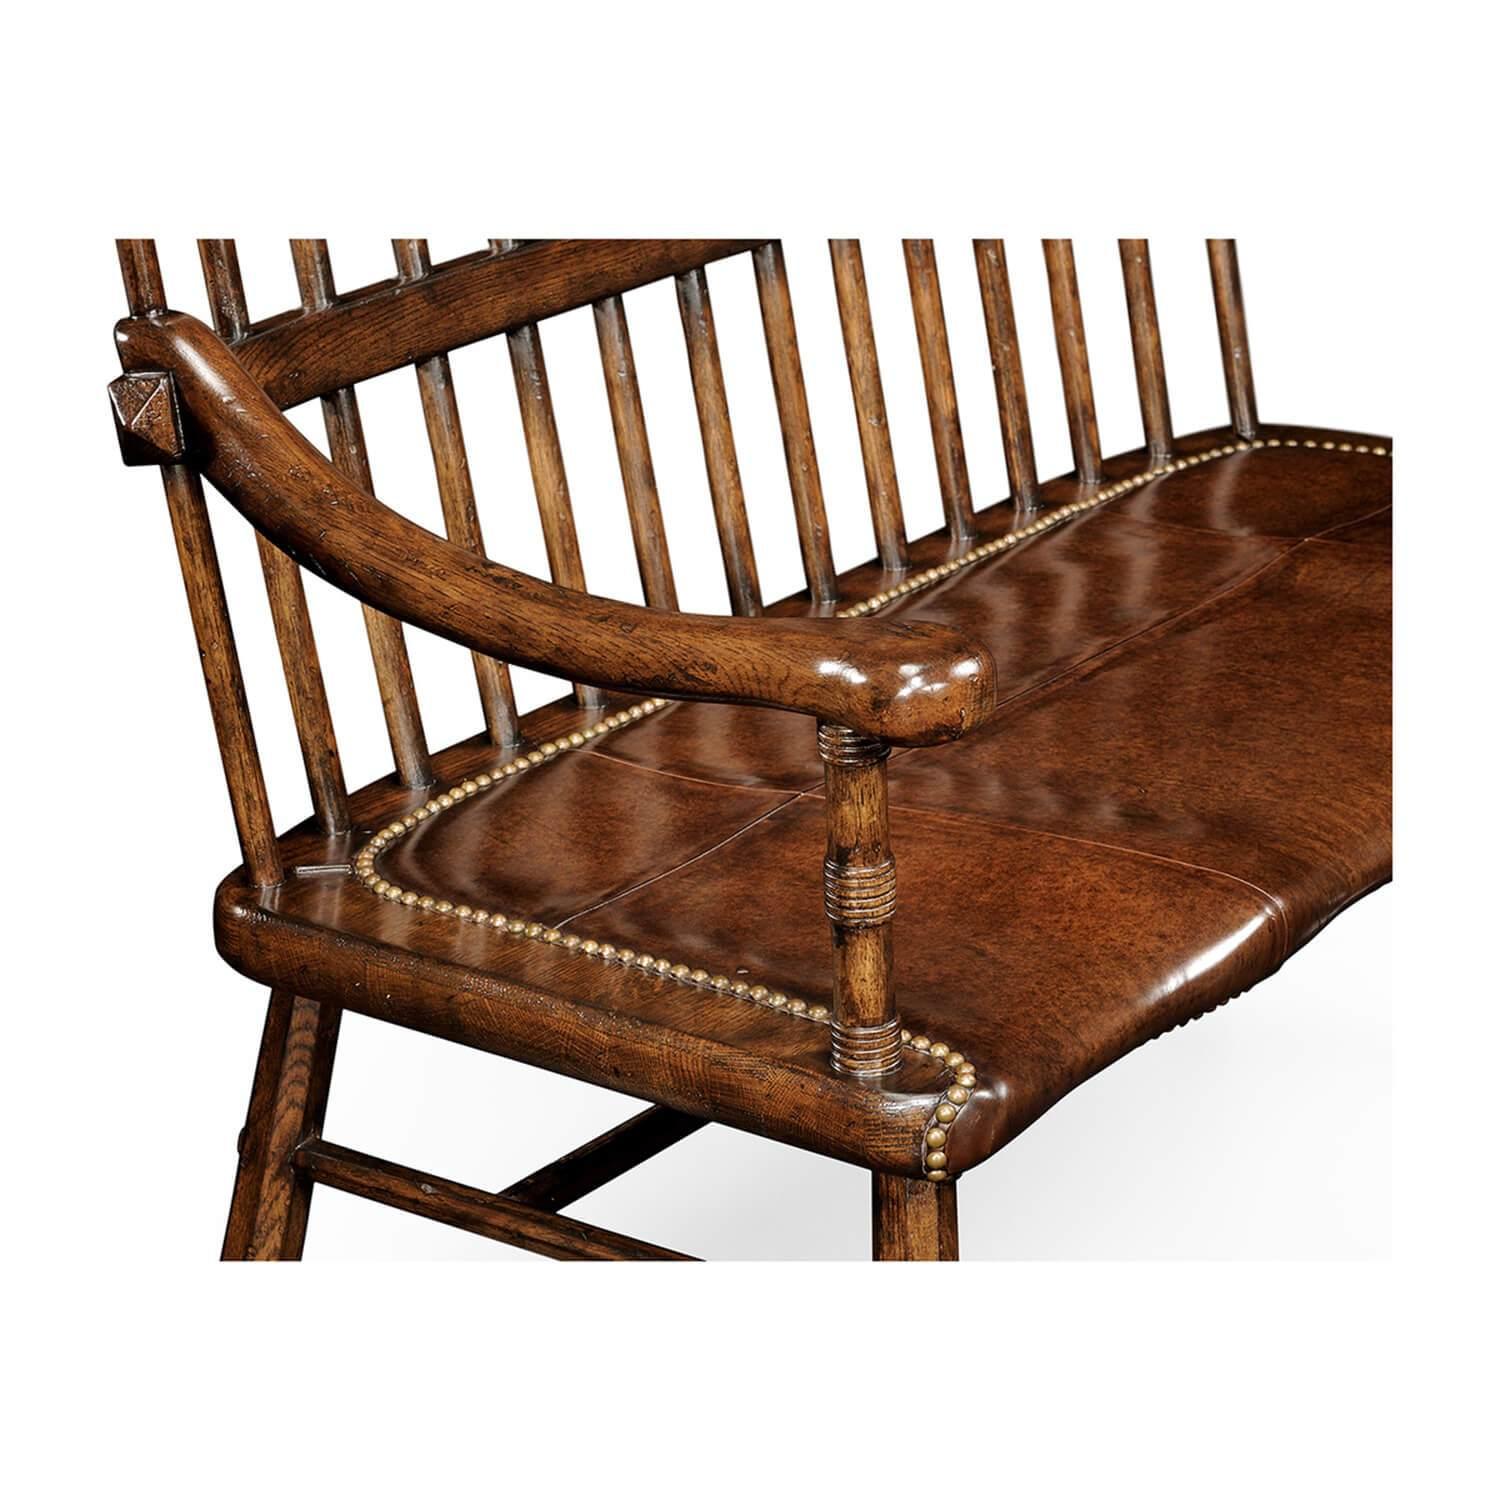 Contemporary Rustic Oak Country Bench For Sale